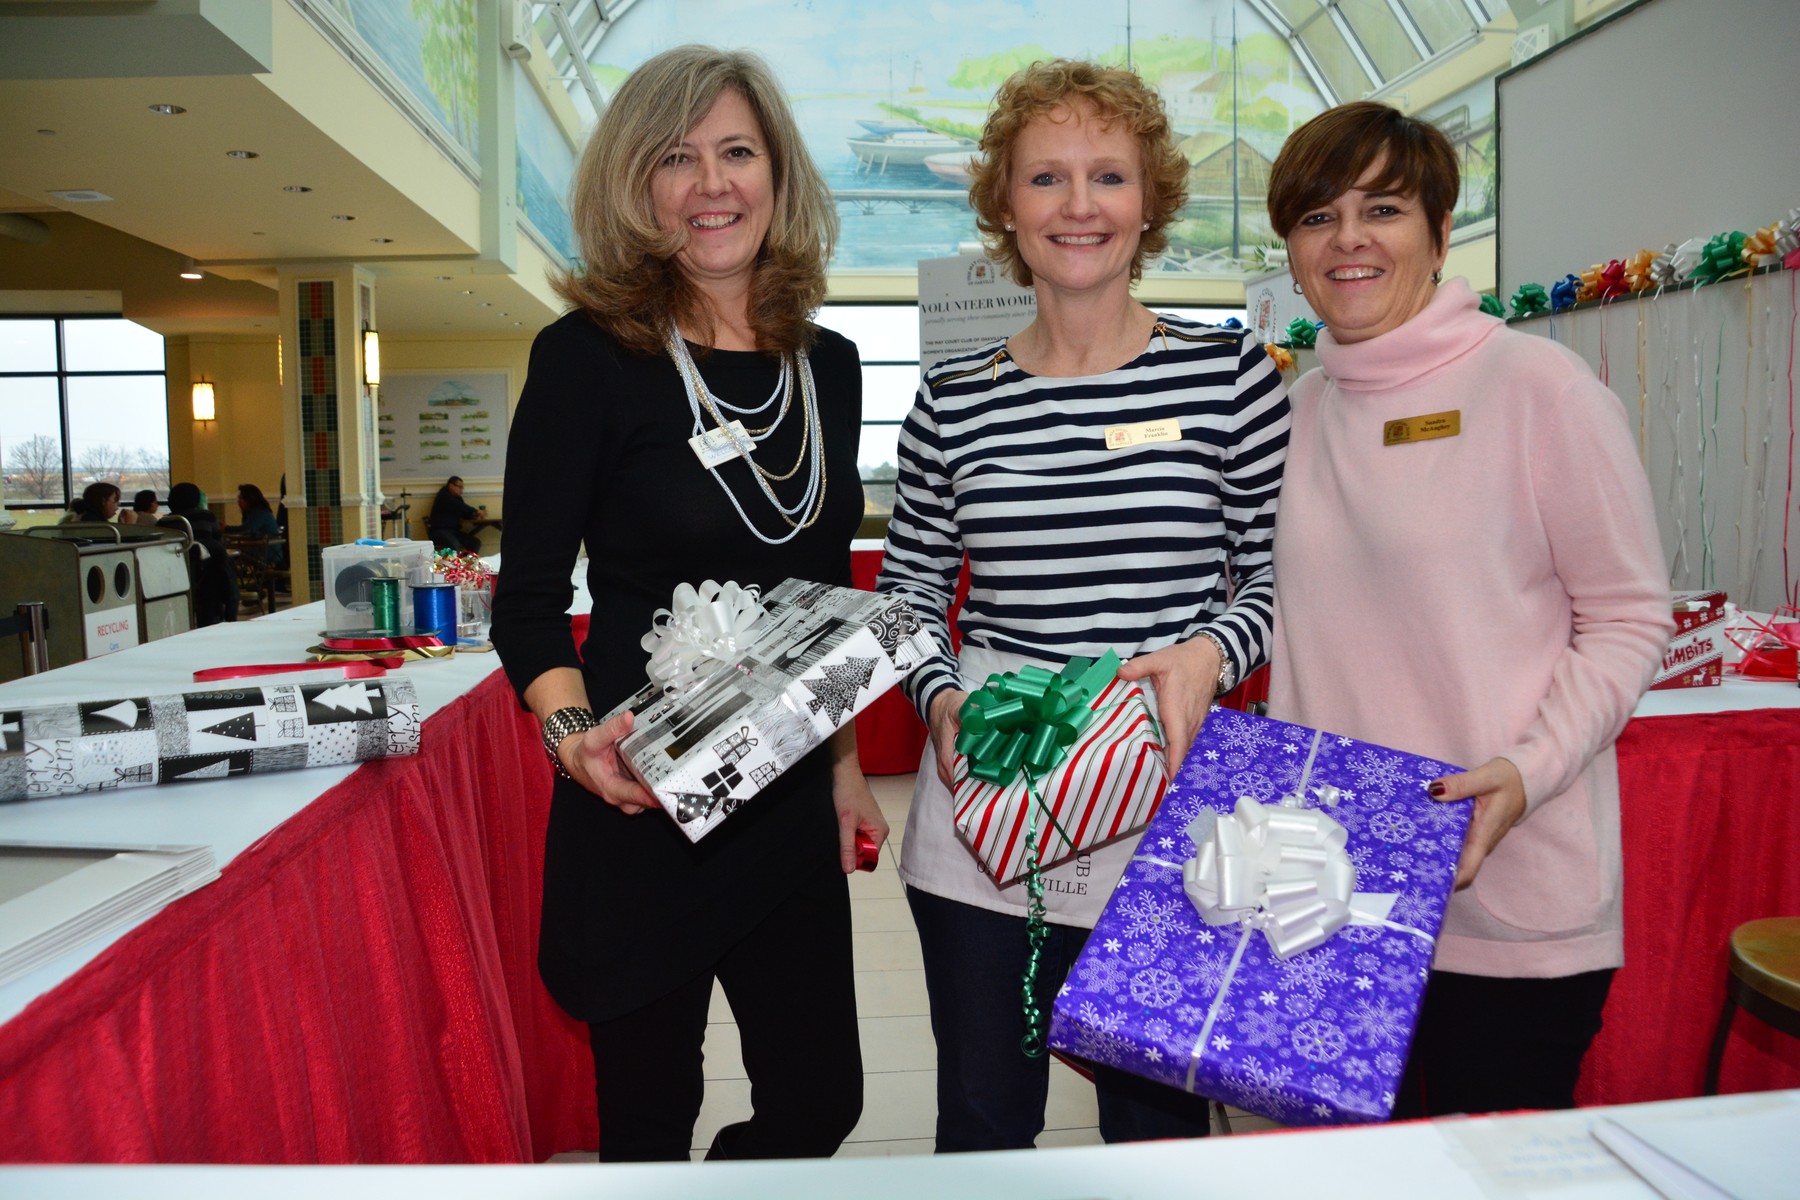 Wrap Your Gifts with The May Court Club of Oakville. Rio Can Oakville Shopping Centre1-9pm til Christmas Eve! |  Wrap Your Gifts with The May Court Club of Oakville. Rio Can Oakville Shopping Centre1-9pm til Christmas Eve! Photo Credit: Janet Bedford